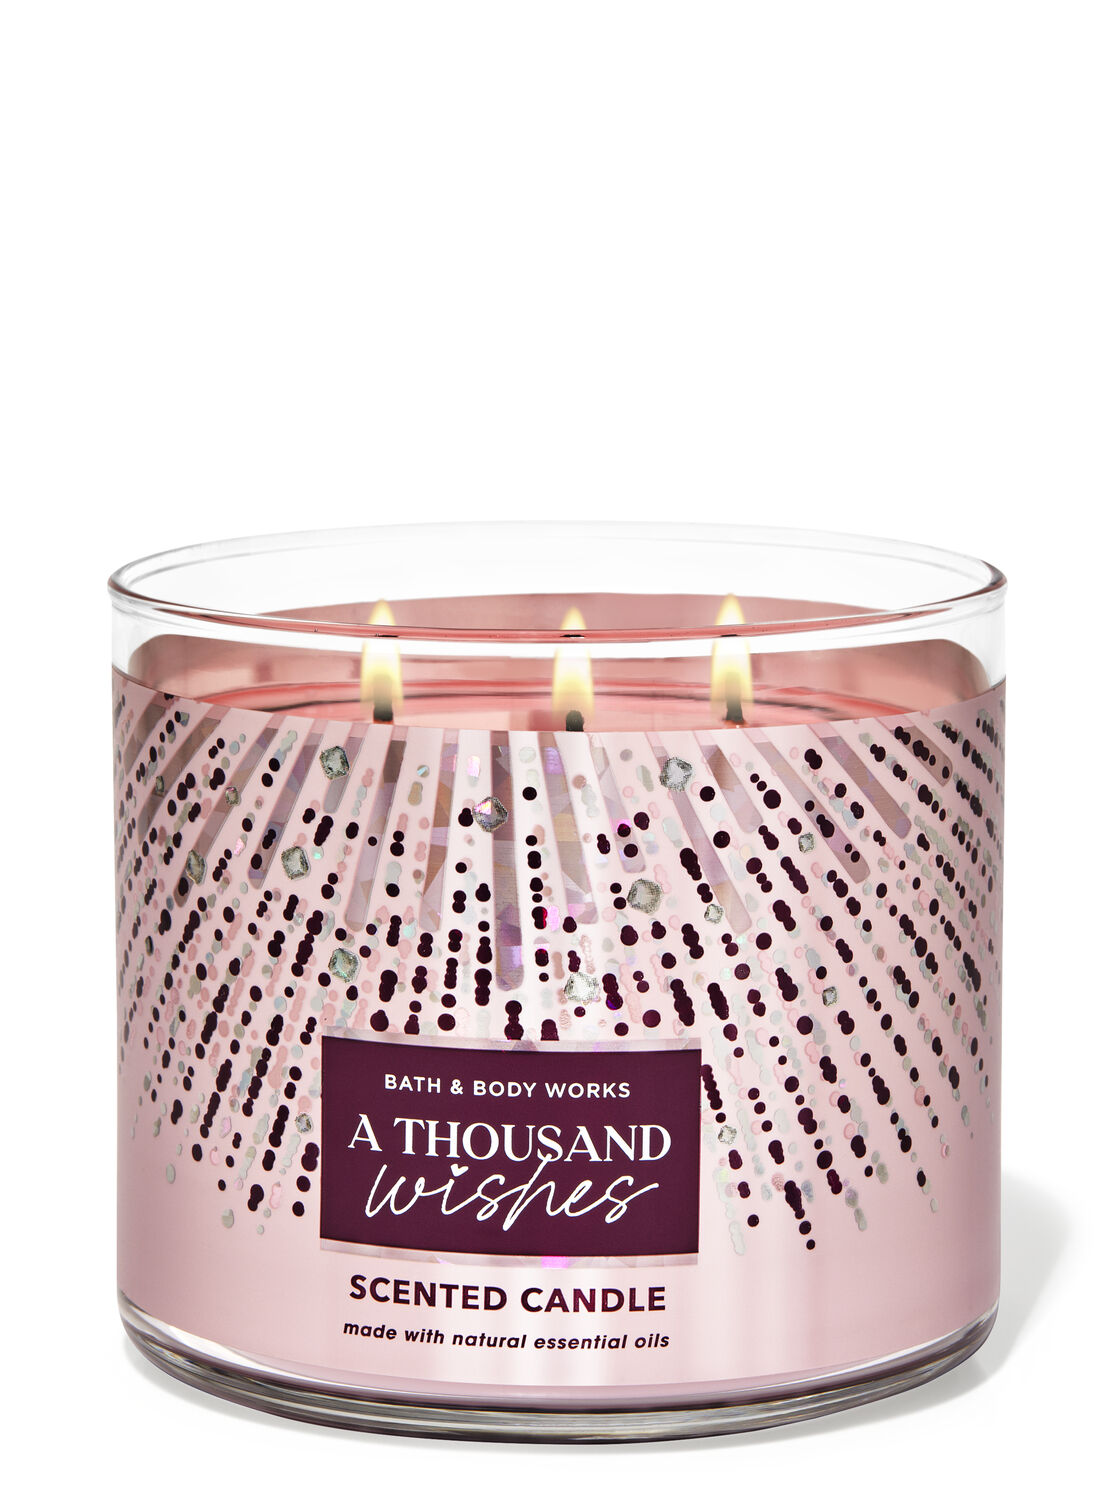 Bath & Body Works 3-Wick Candles Are On Sale for $10